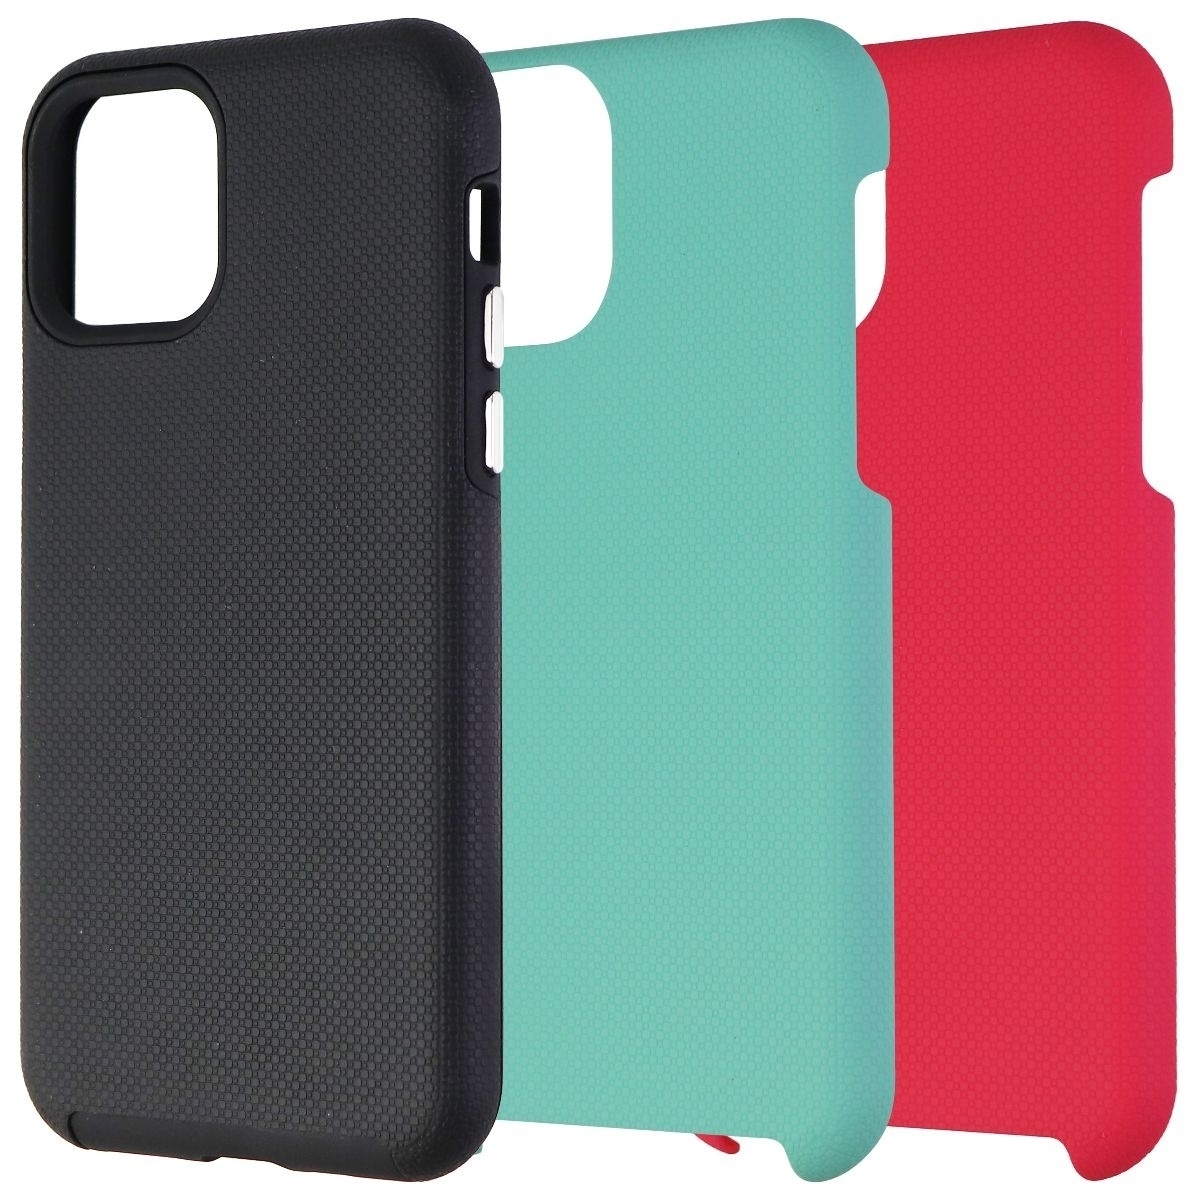 Blu Element Armour 2x Case & Colour Kit For IPhone 11 Pro - Black/Green/Pink